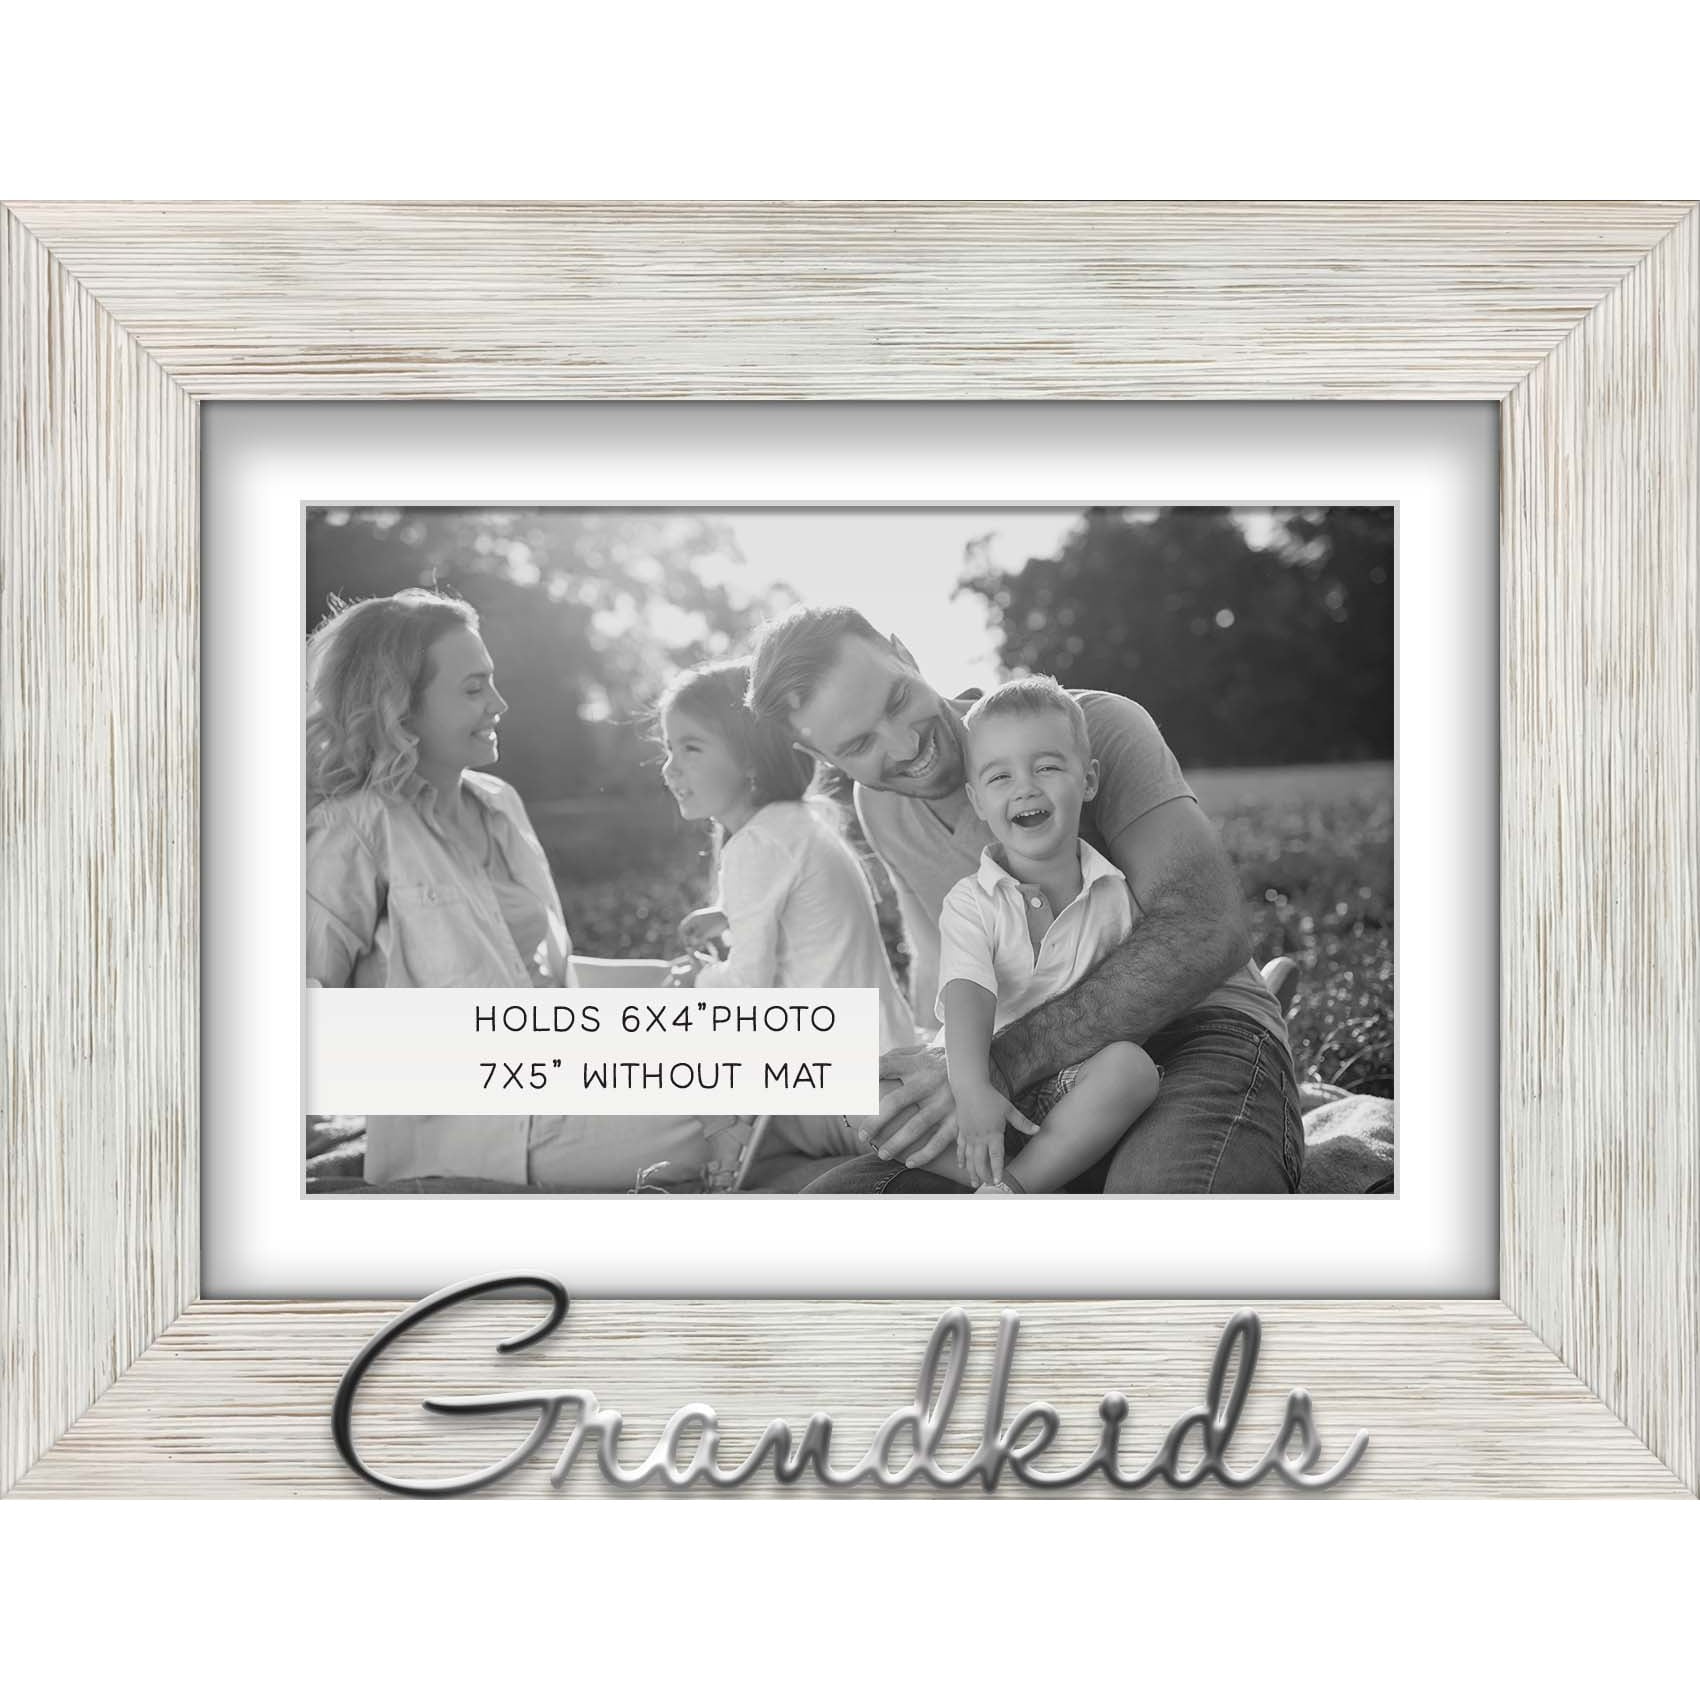 Giftgarden 4x6 Picture Frame Set of 4 White Wood Grain Frames for 4x6  Photos with Mat or 5x7 without Mat, Wall or Tabletop Display